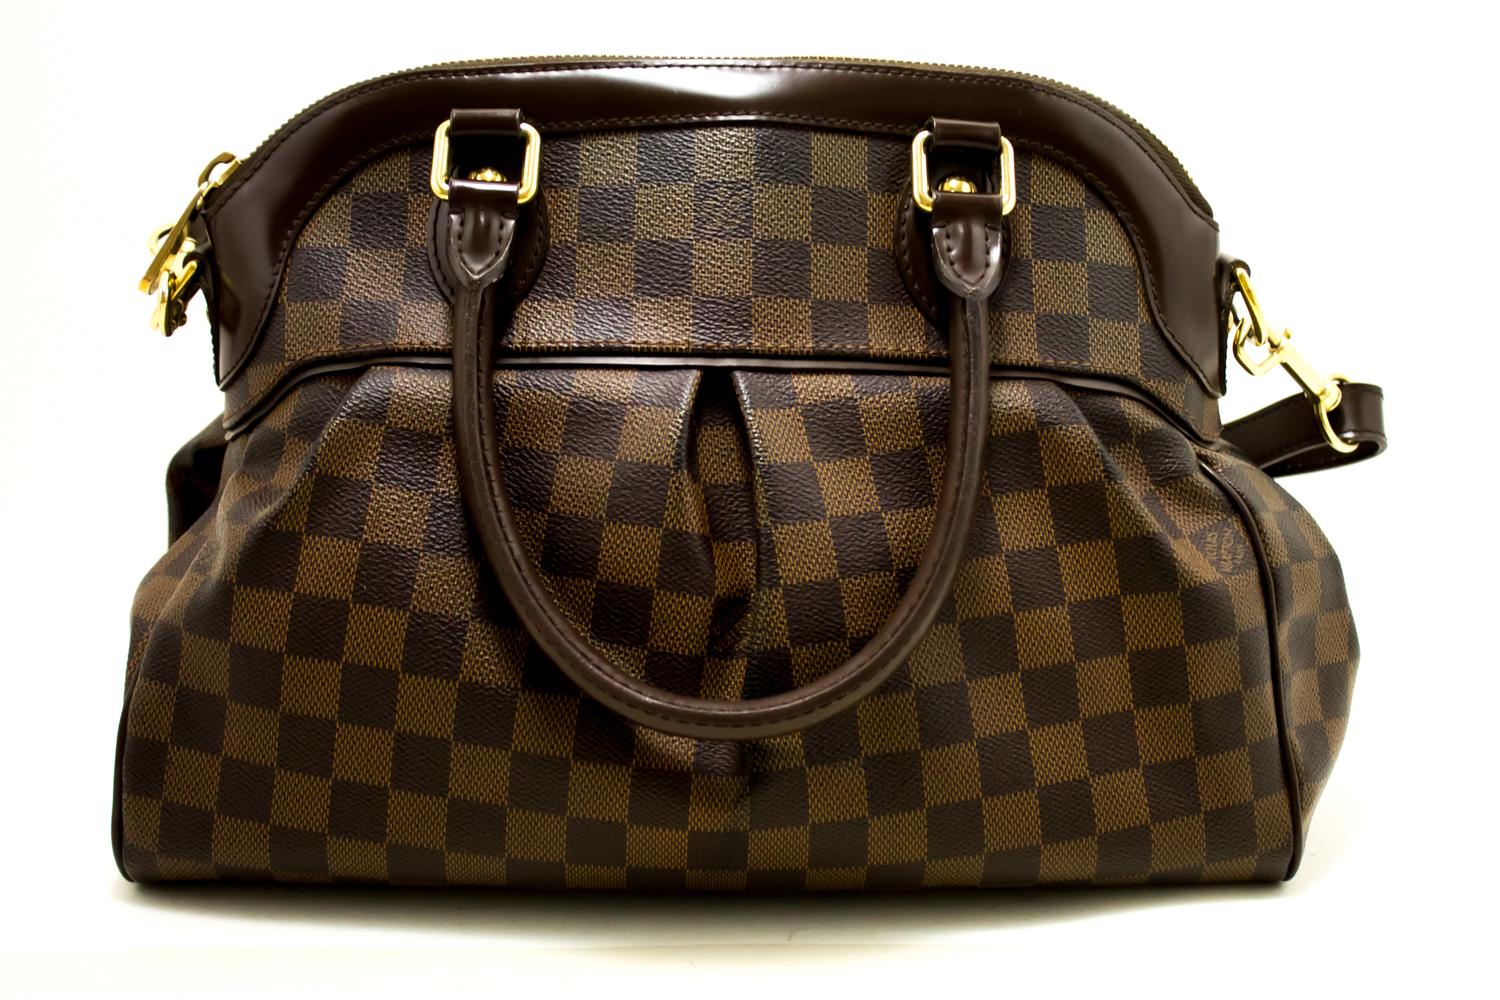 An authentic Louis Vuitton Trevi PM Damier Ebene Shoulder Bag Strap Canvas. The color is Brown. The outside material is Canvas. The pattern is Damier.
Conditions & Ratings
Outside material: Canvas / Leather
Main color: Brown
Closure: